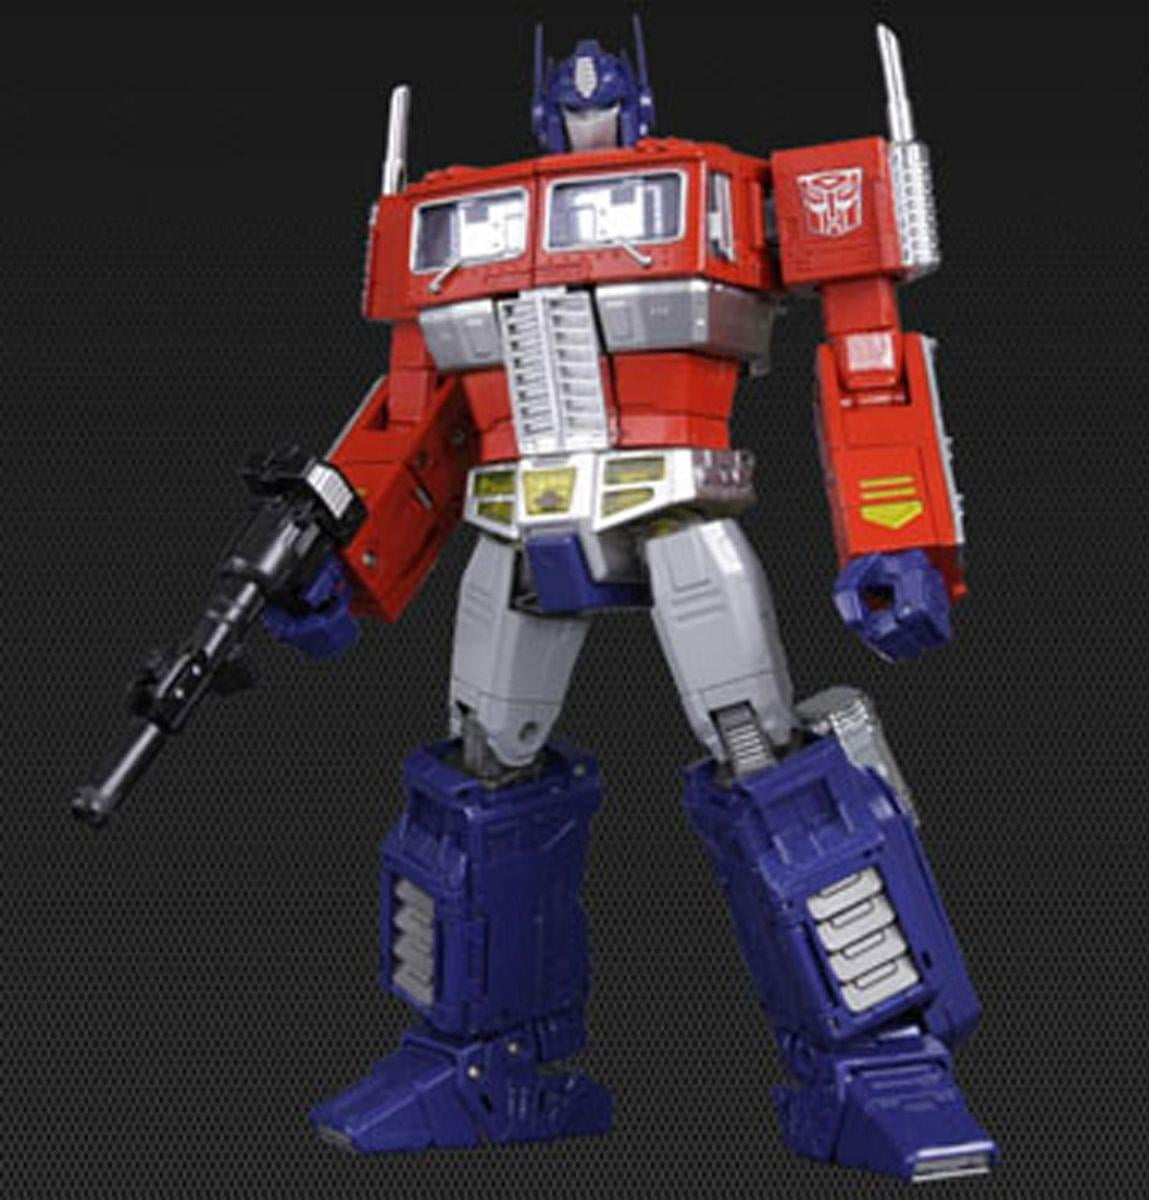 TRANSFORMERS MASTERPIECE MP-10 OPTIMUS PRIME US VER TOY NEW IN BOX 